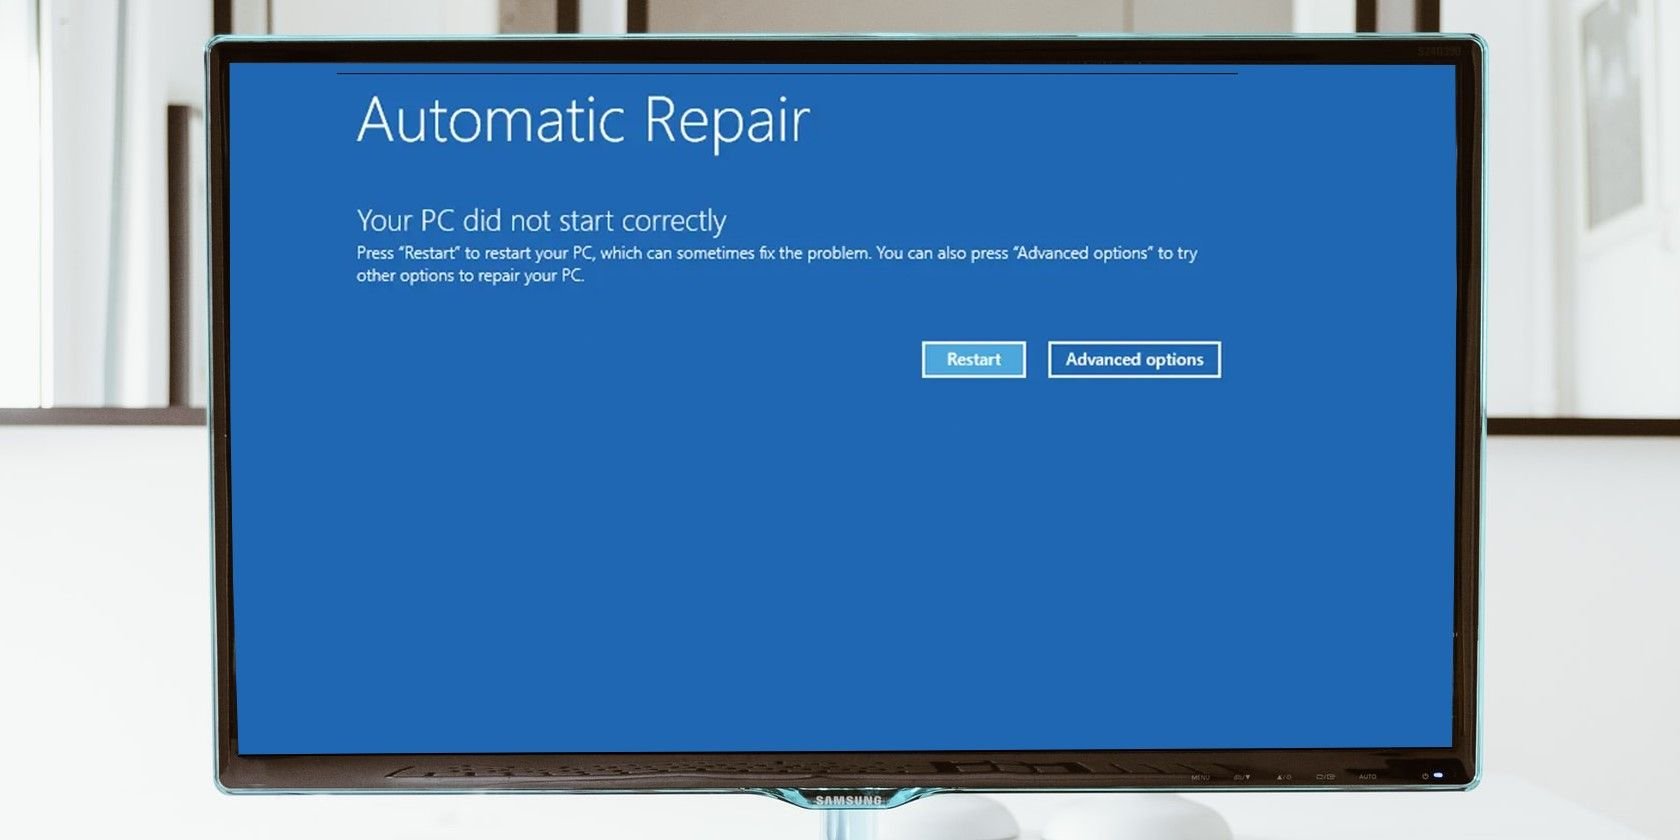 7 Ways to Fix the “Your PC Did Not Start Correctly” Error